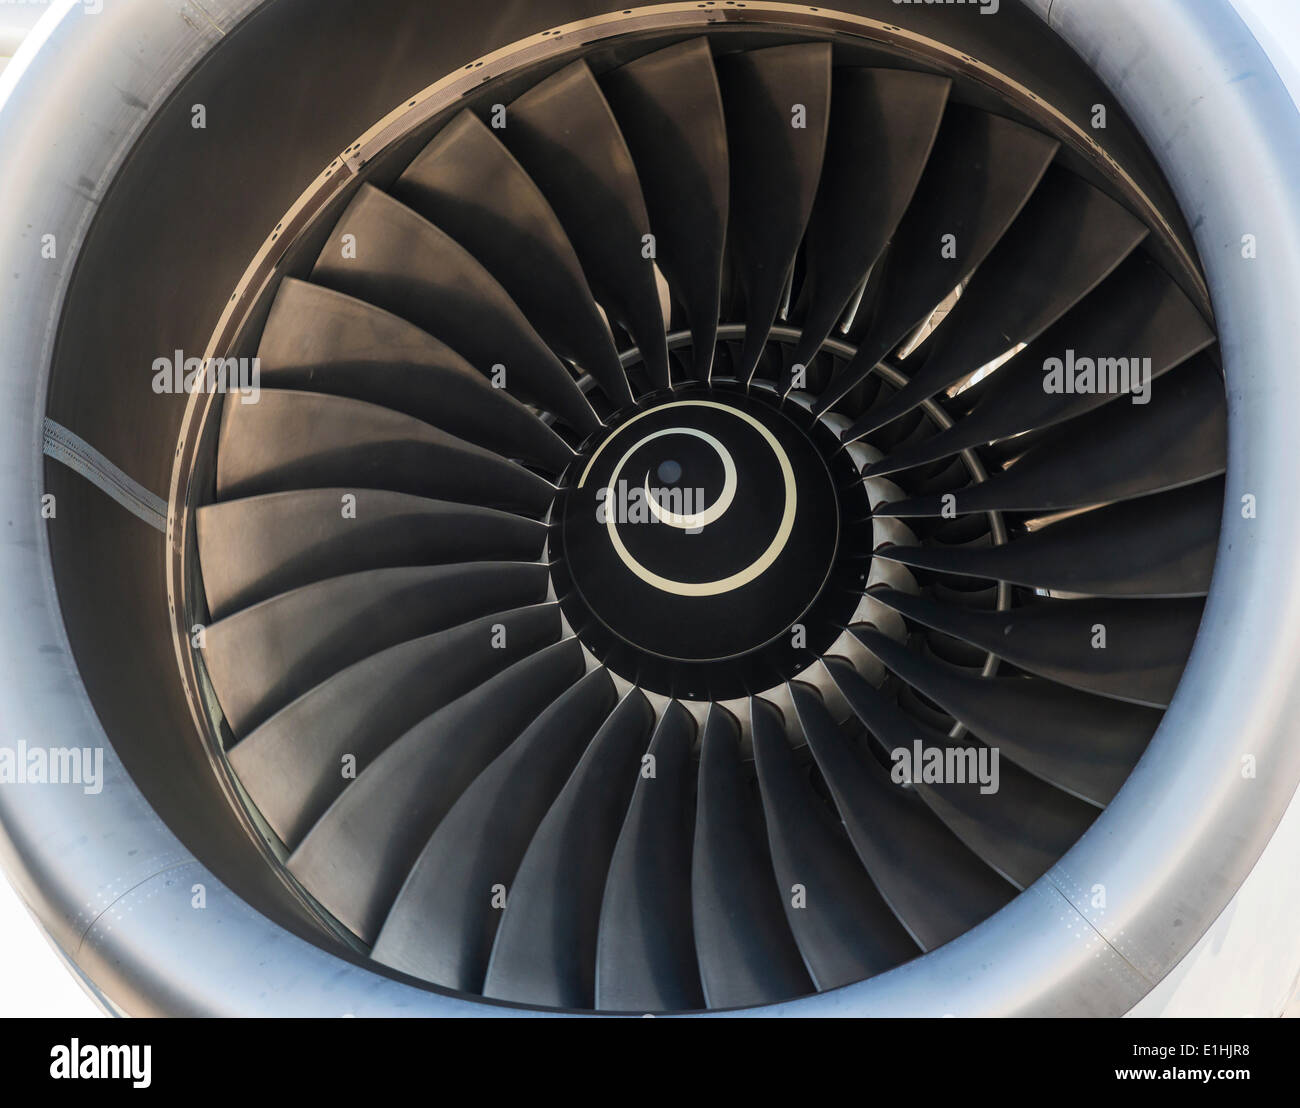 Jet engine, Airbus A340 turbine, South Africa Stock Photo